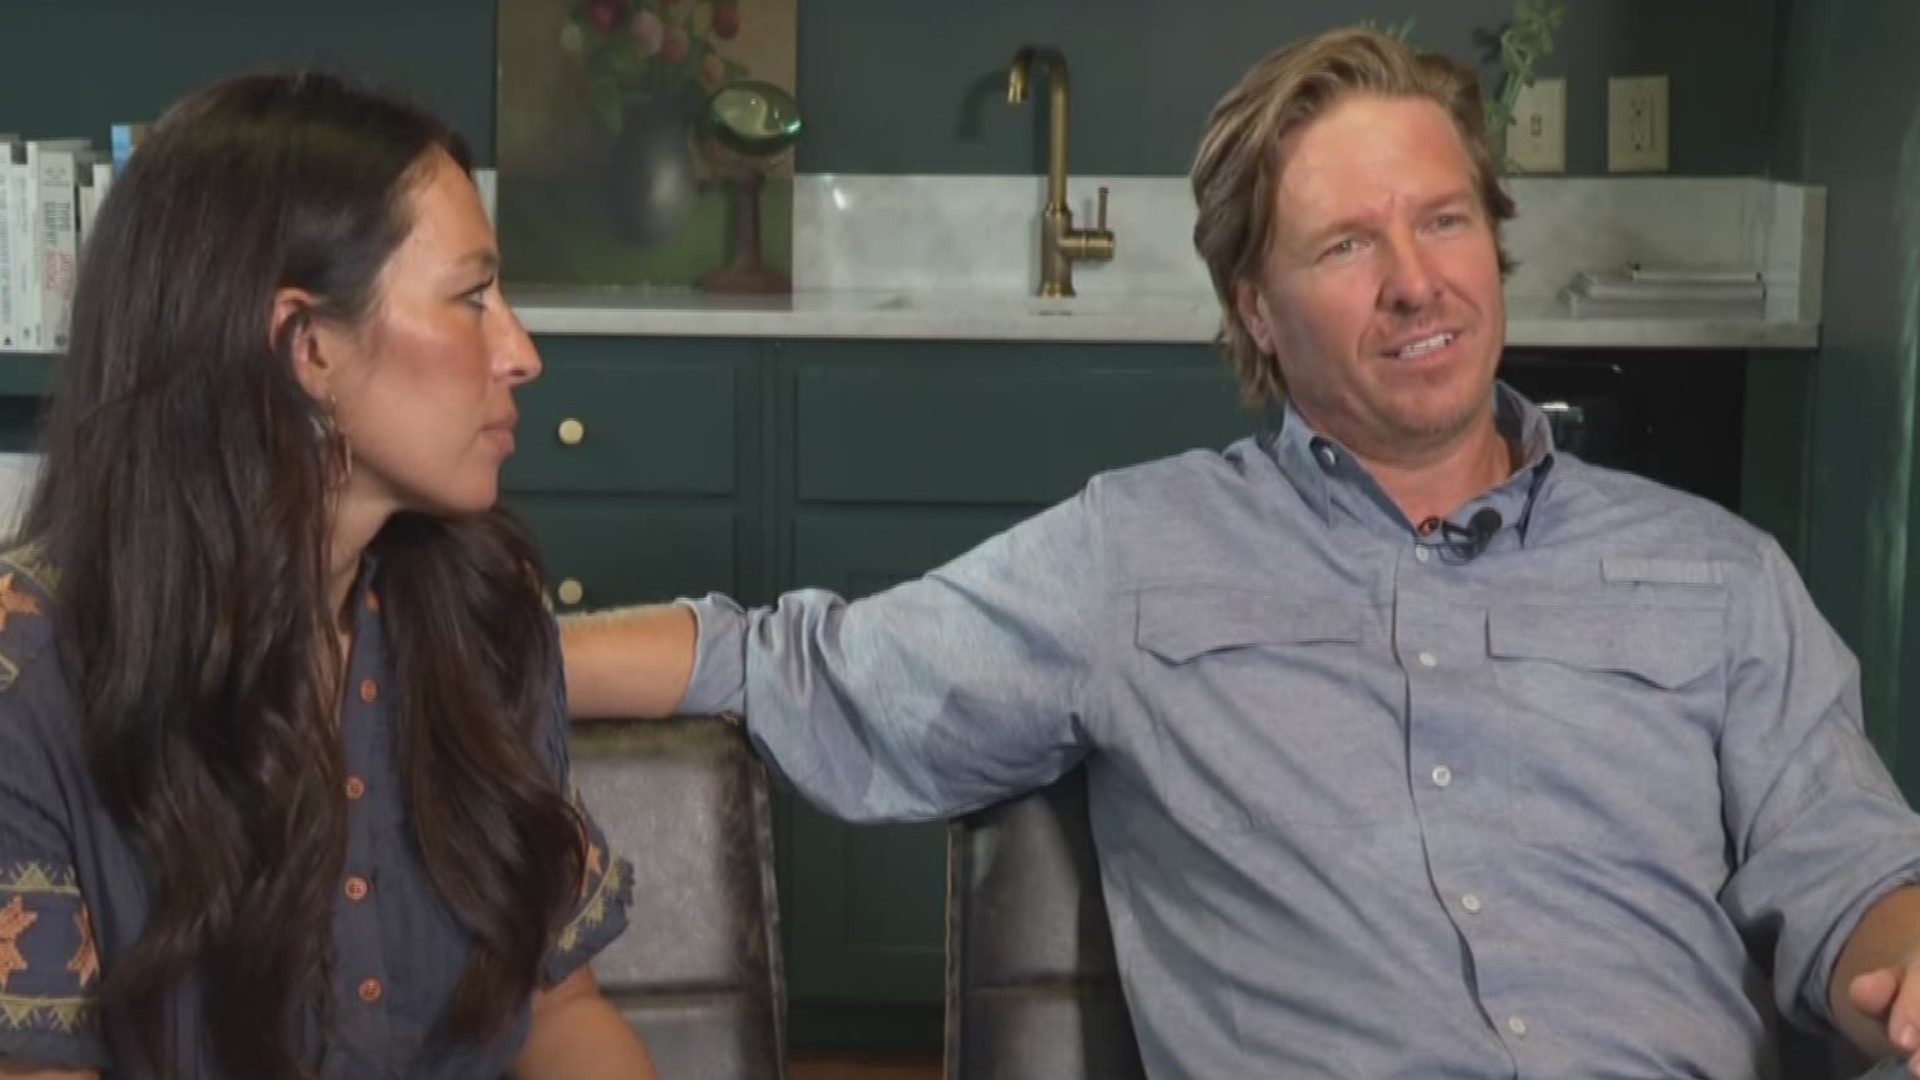 Texas Today anchor Heidi Alagha sat down with Chip and Joanna Gaines to talk about their plans in Waco.